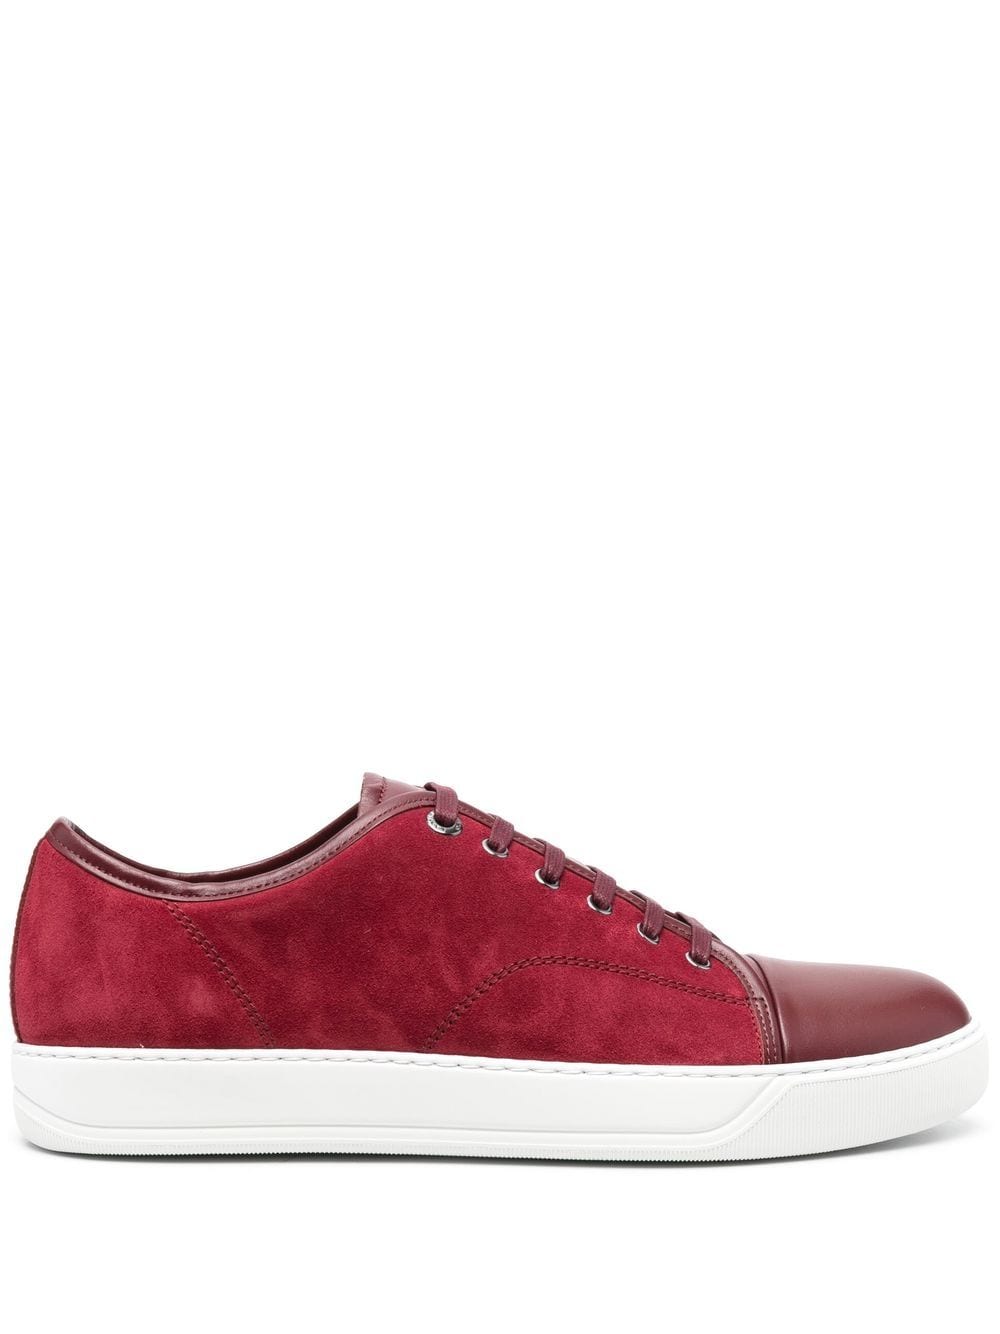 Lanvin DBB1 panelled leather low-top sneakers - Red von Lanvin